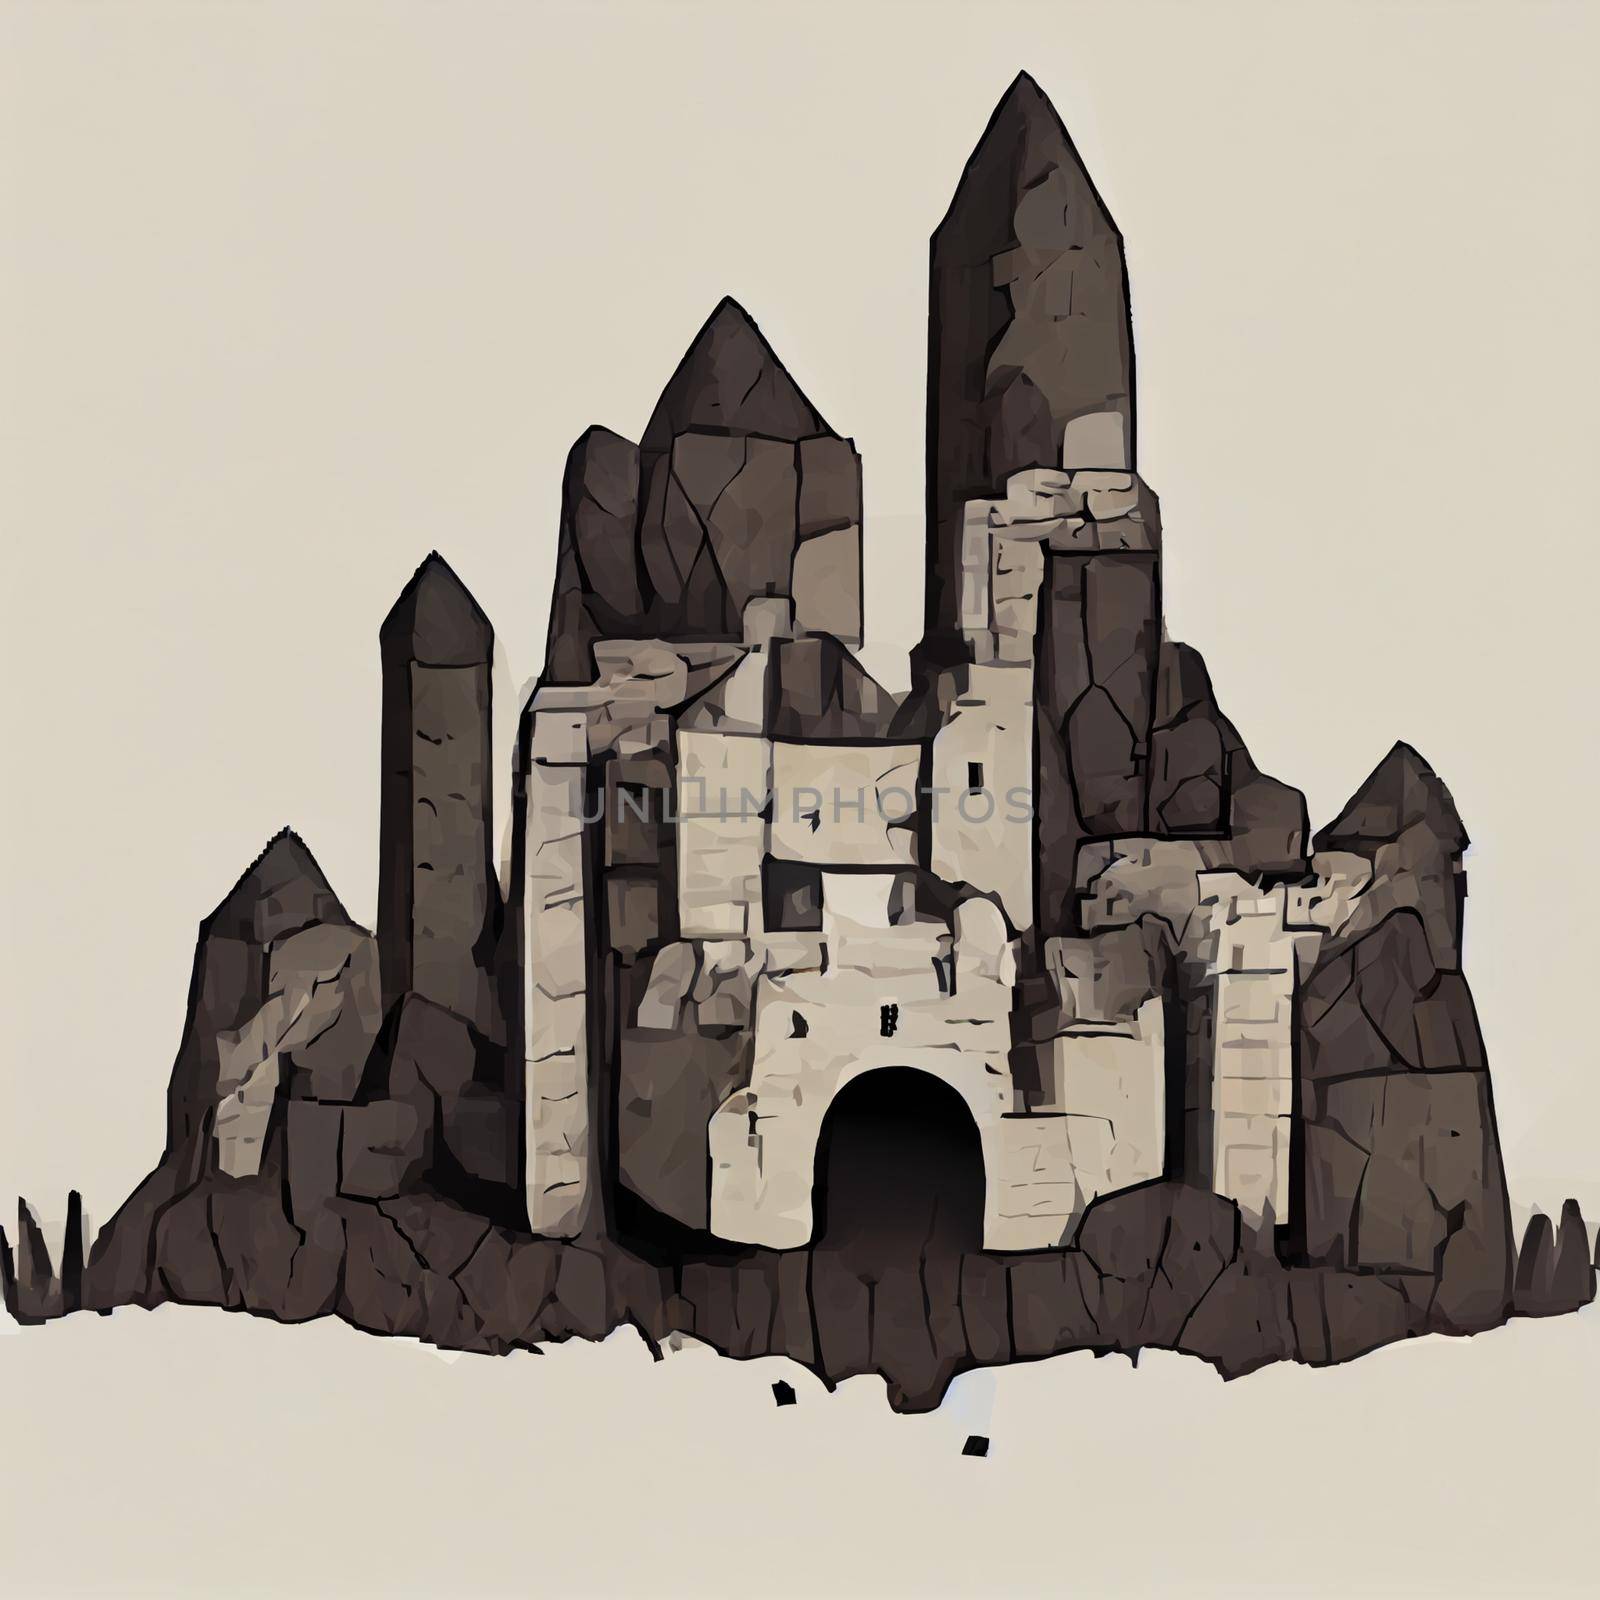 Illustration of the ruins of an ancient castle. High quality illustration